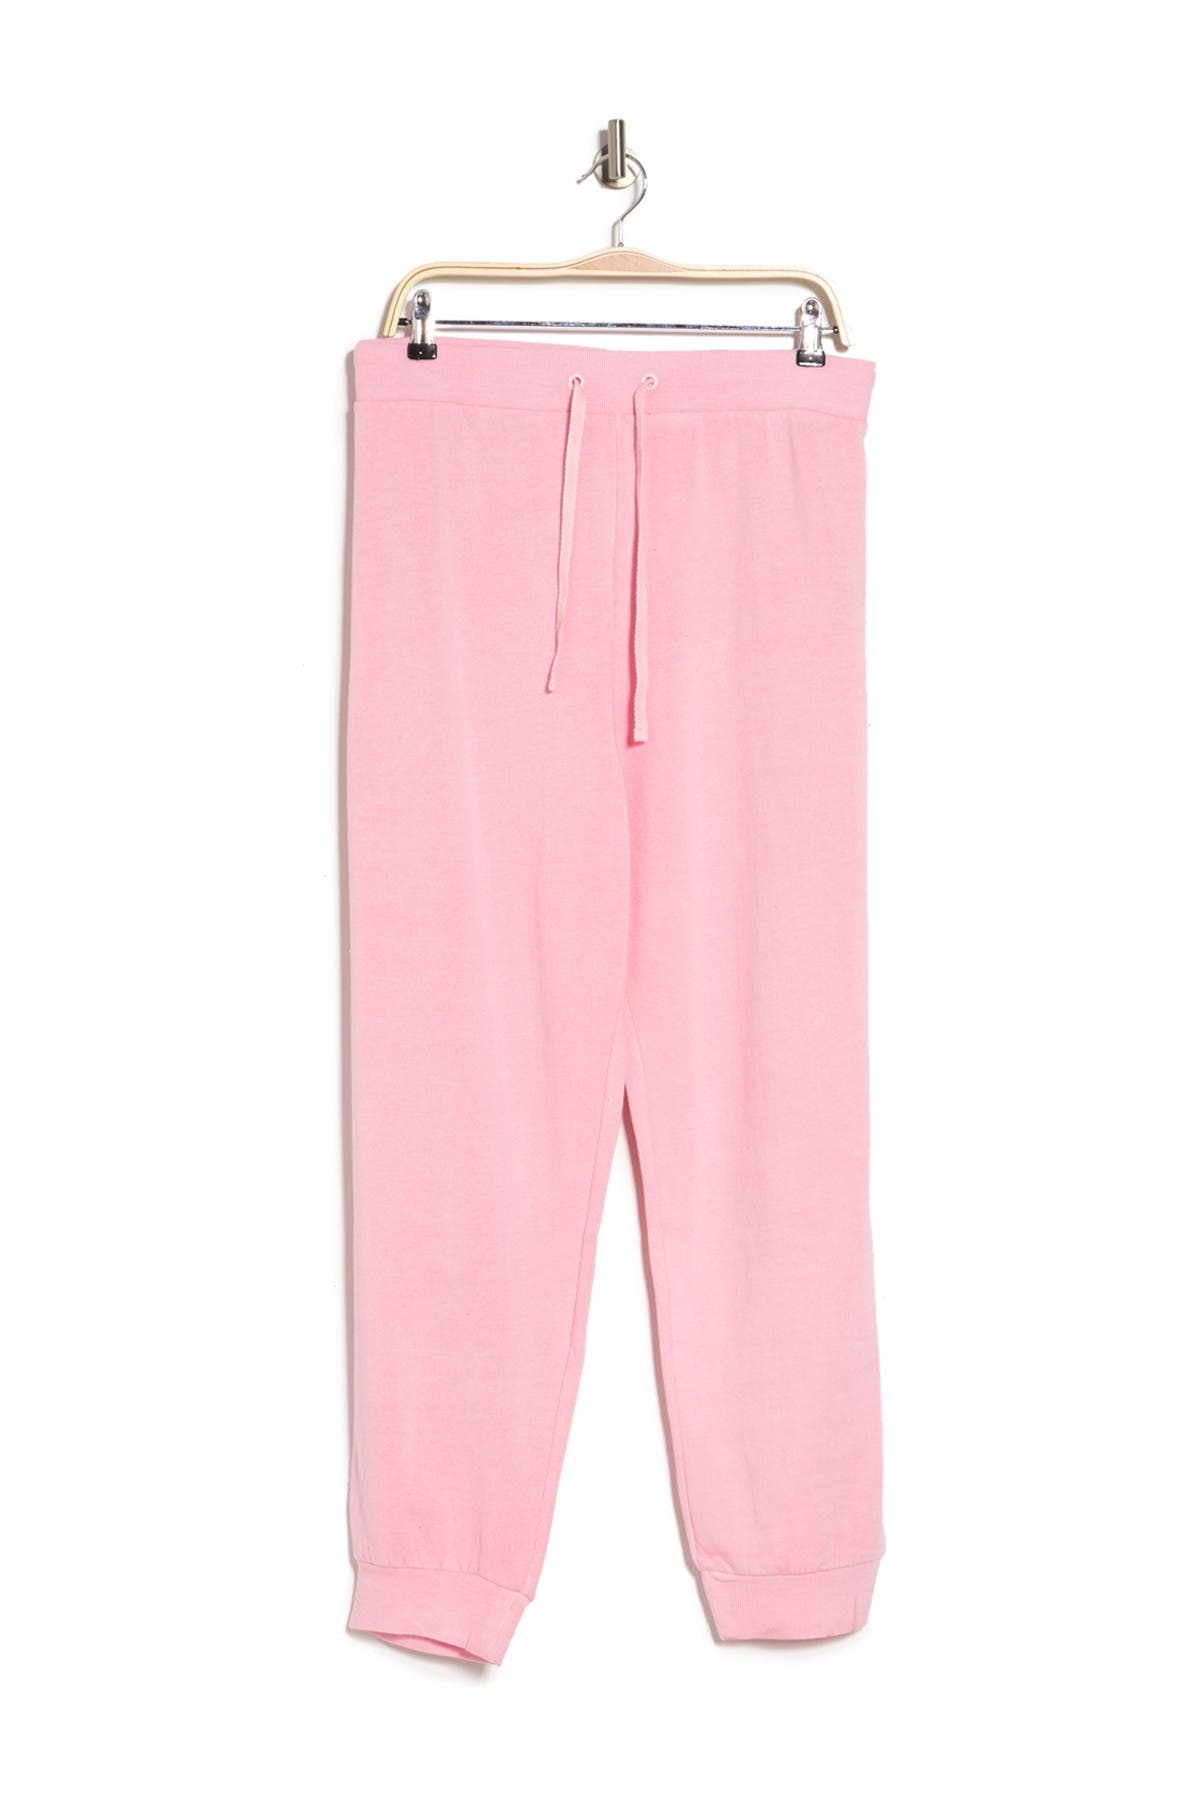 Abound Fleece Drawstring Jogger Pants In Pink Candy